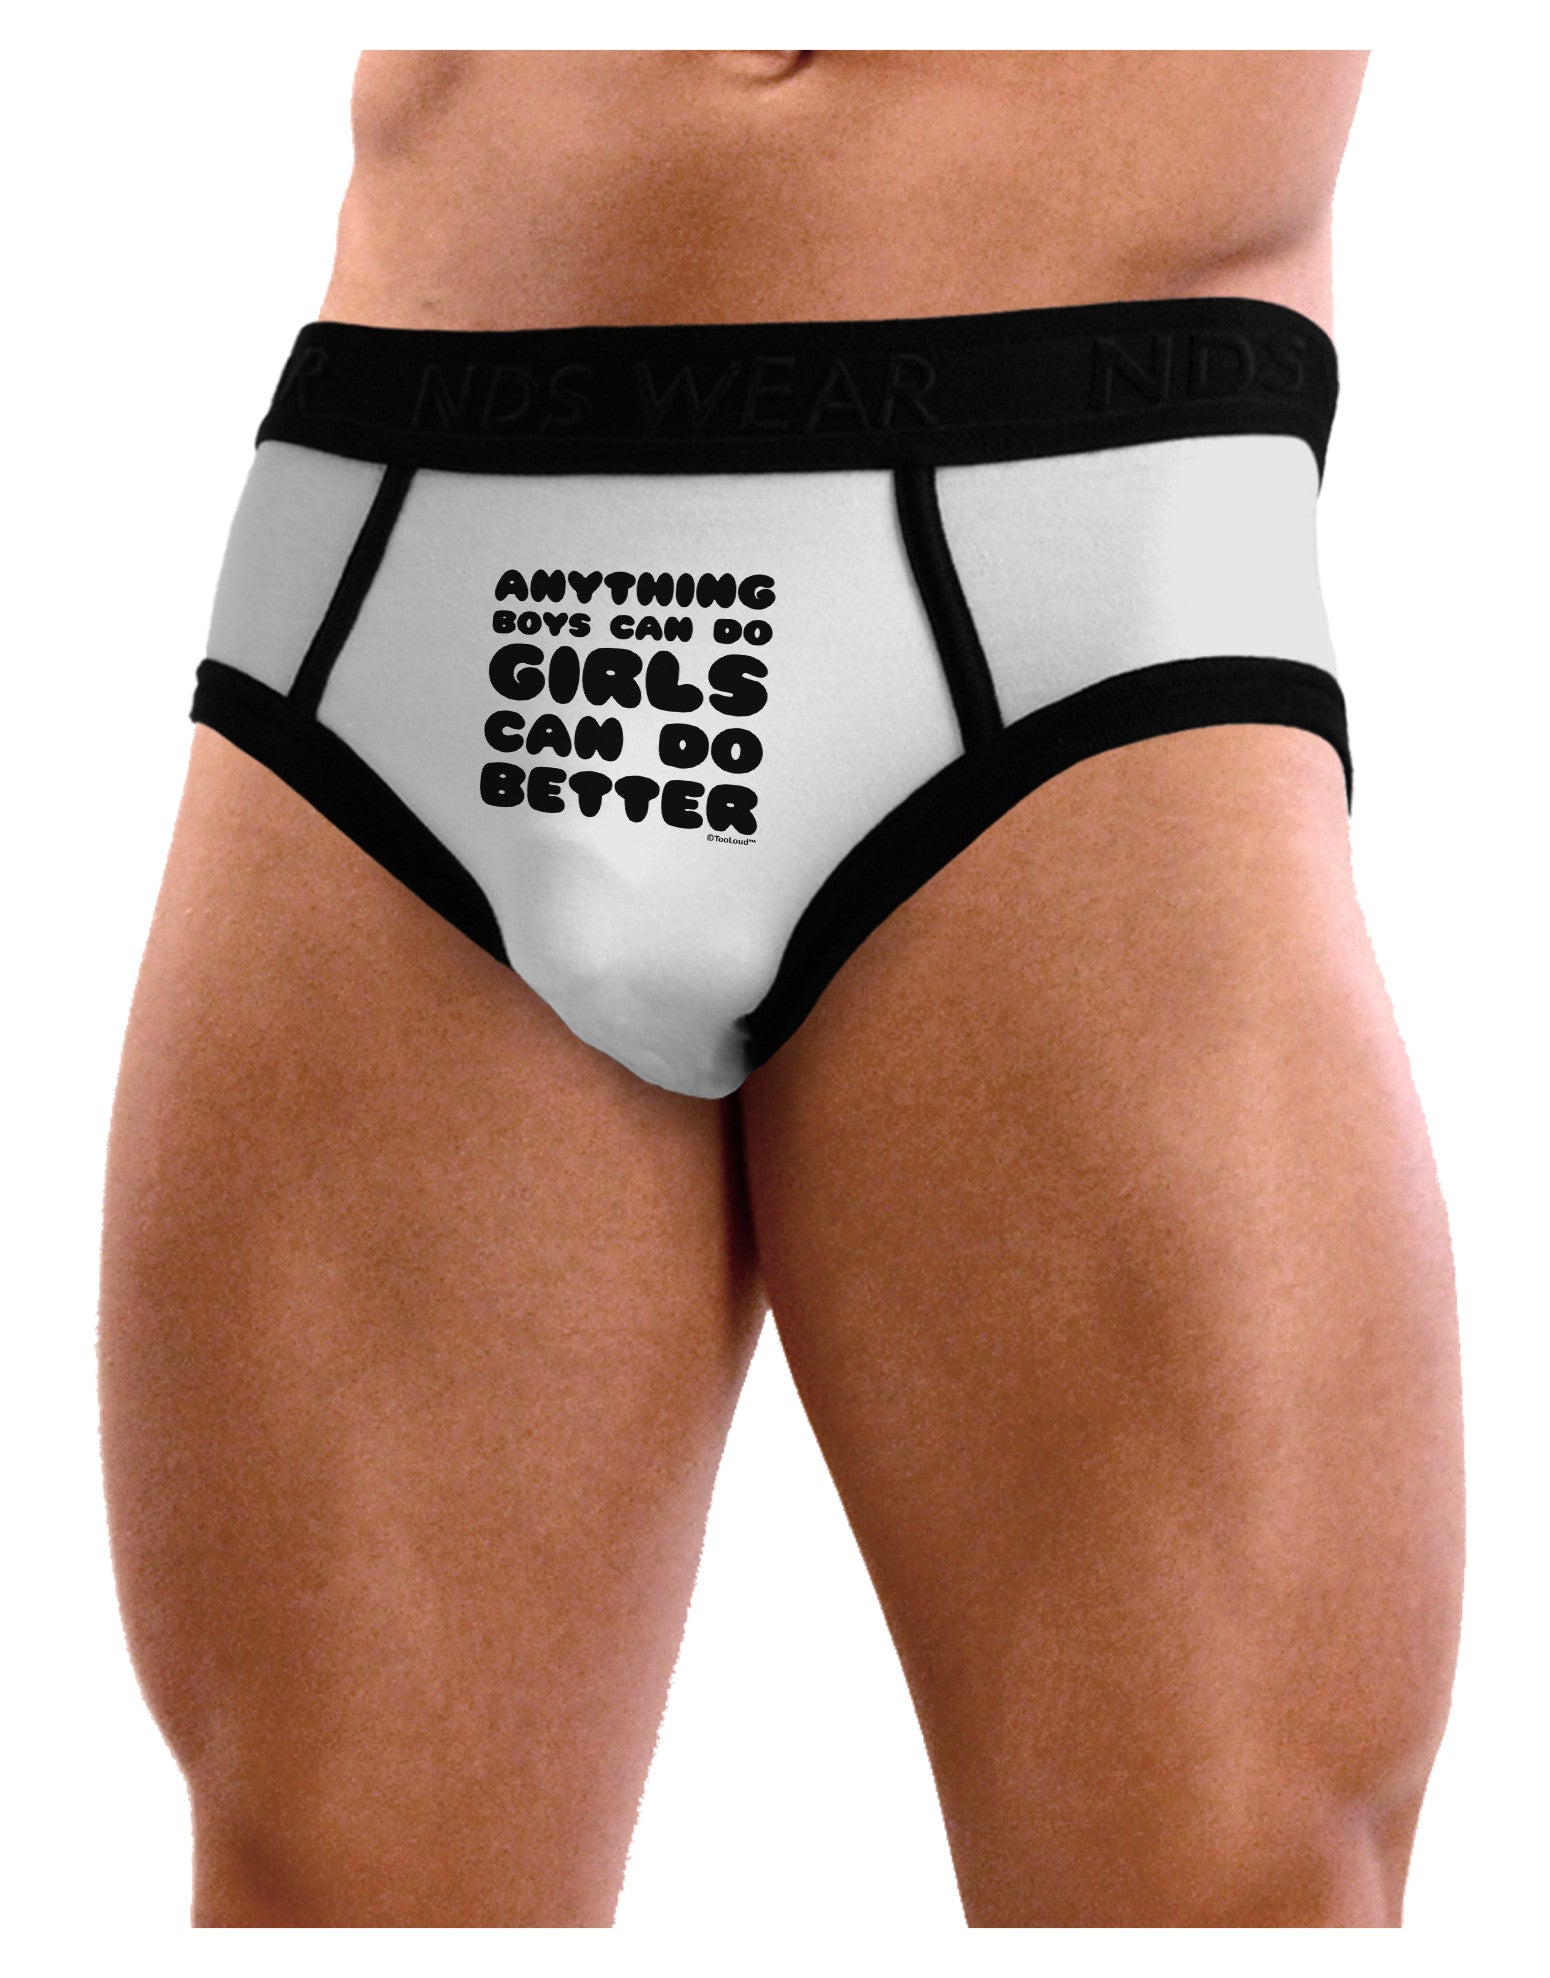 Anything Boys Can Do Girls Can Do Better Mens NDS Wear Briefs Underwear by  TooLoud